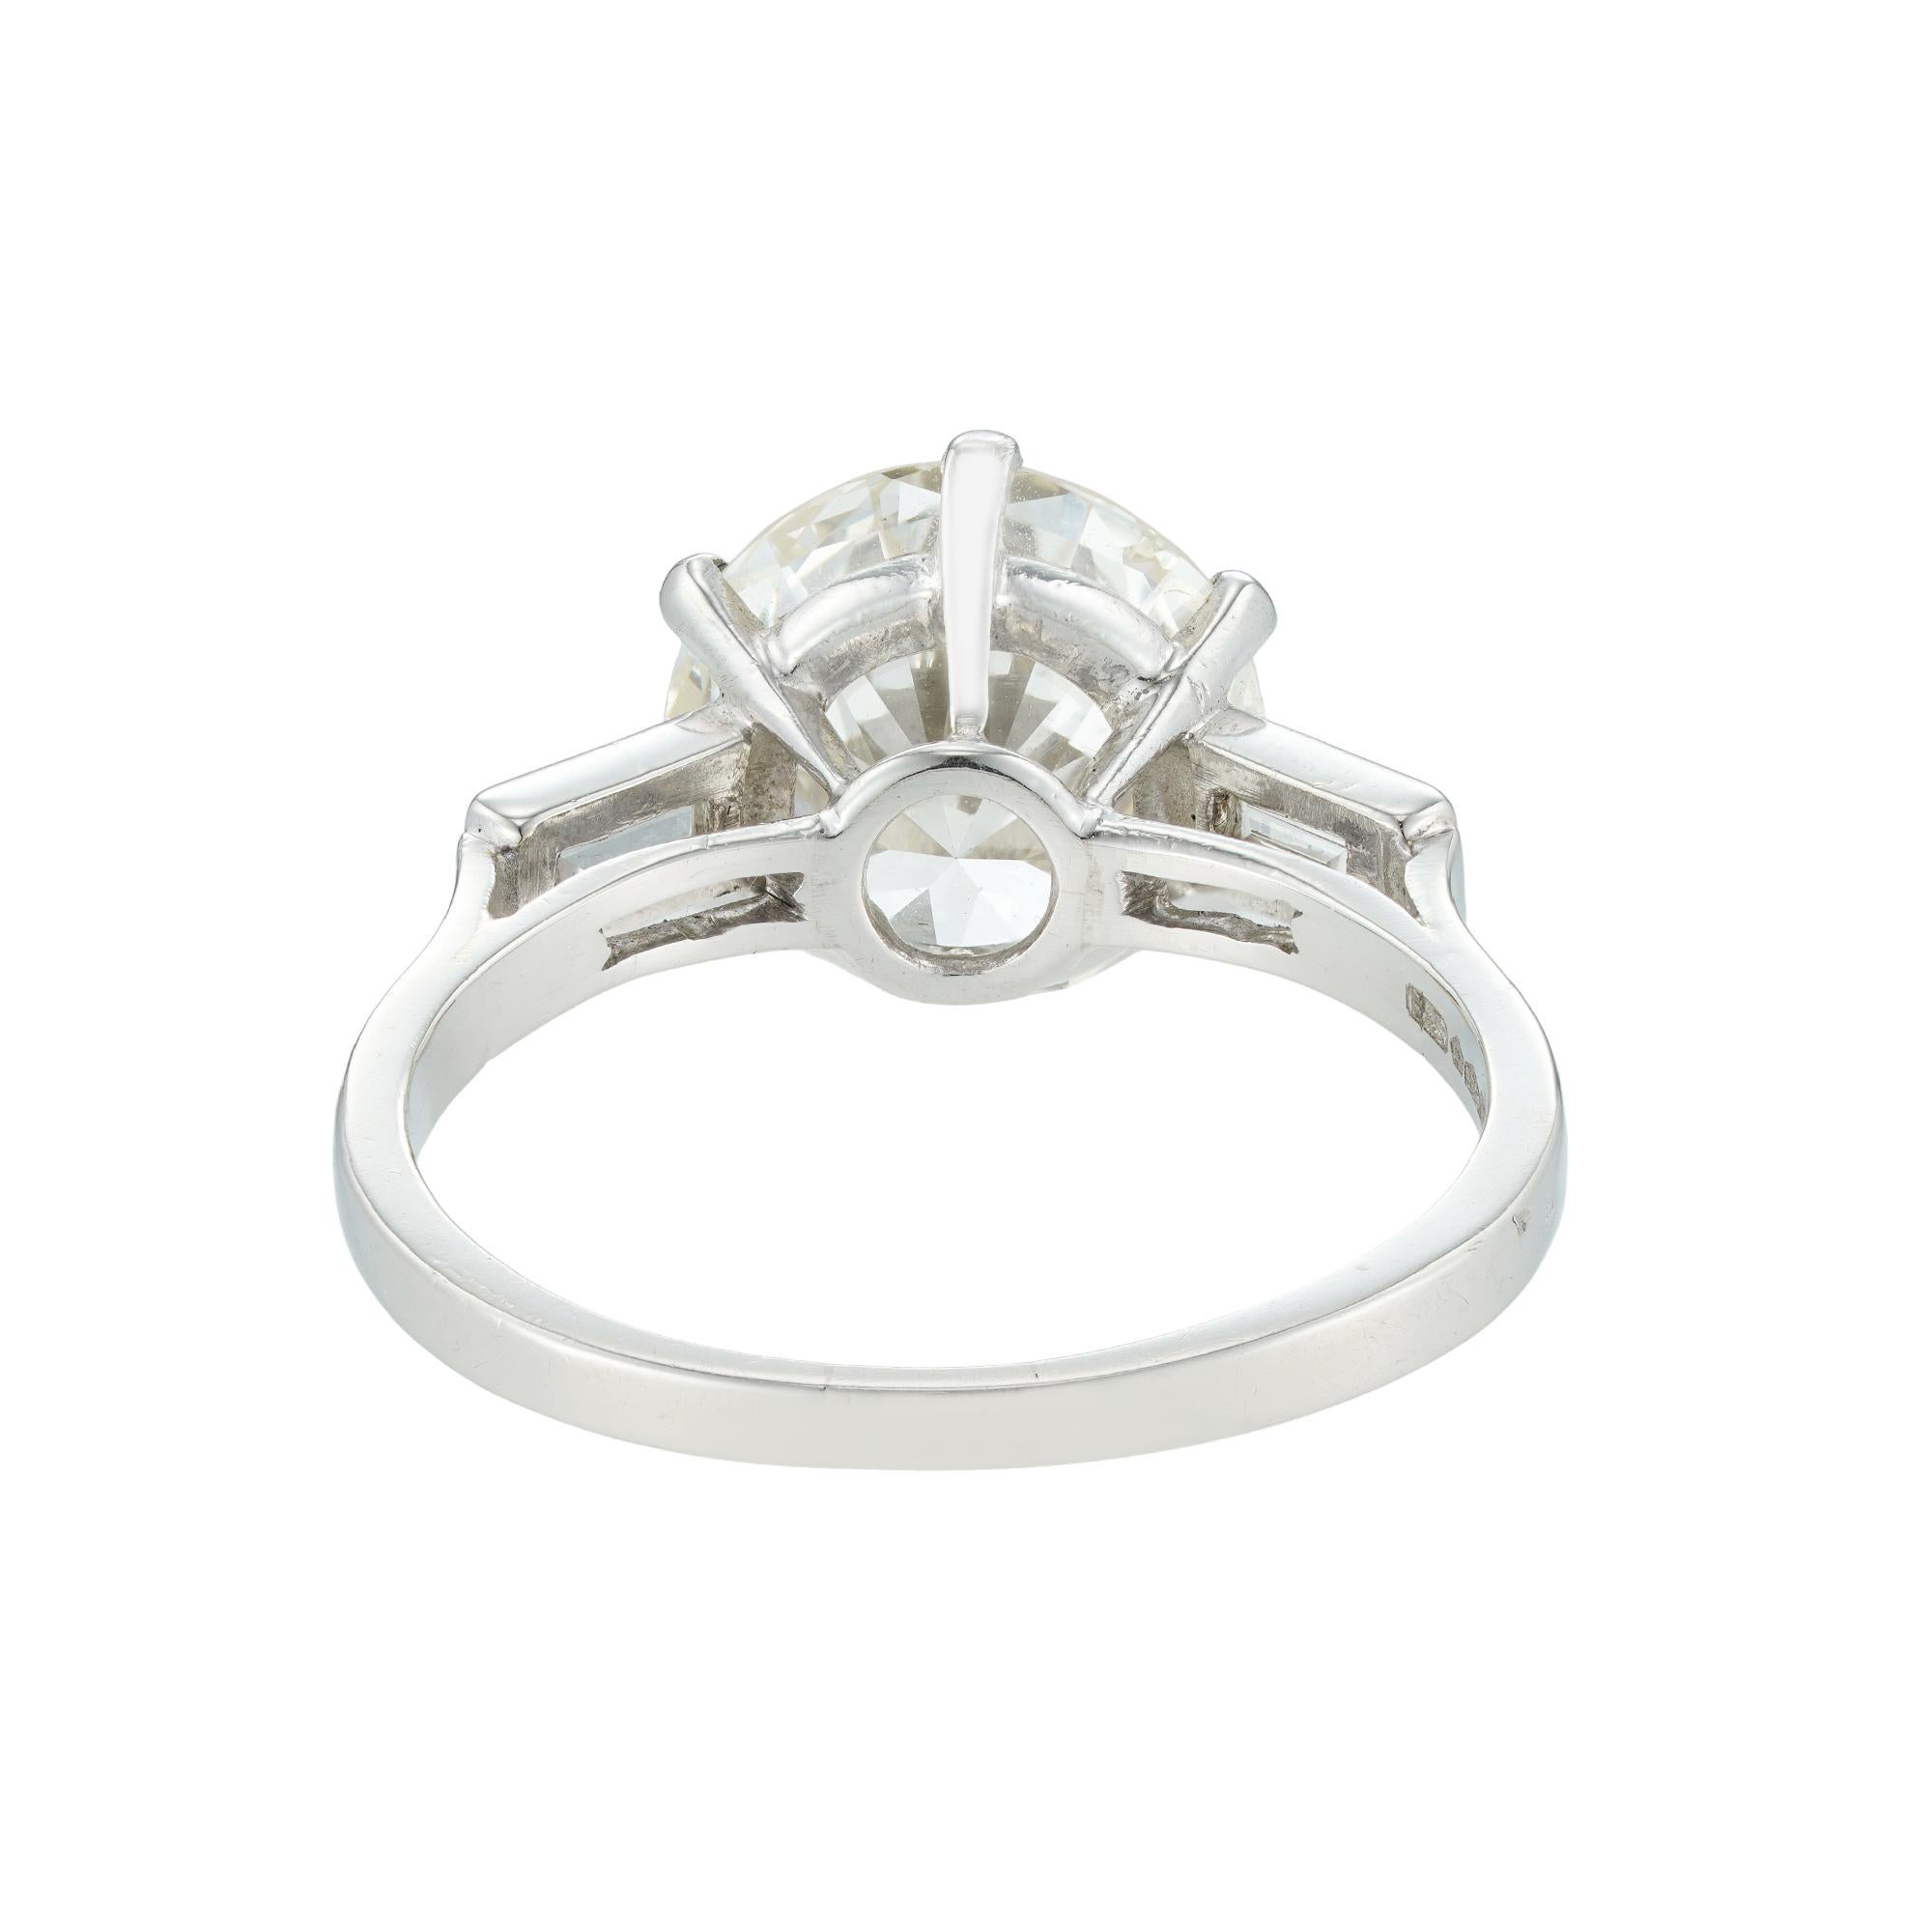 Modern A Single Stone Solitaire Diamond Ring For Sale